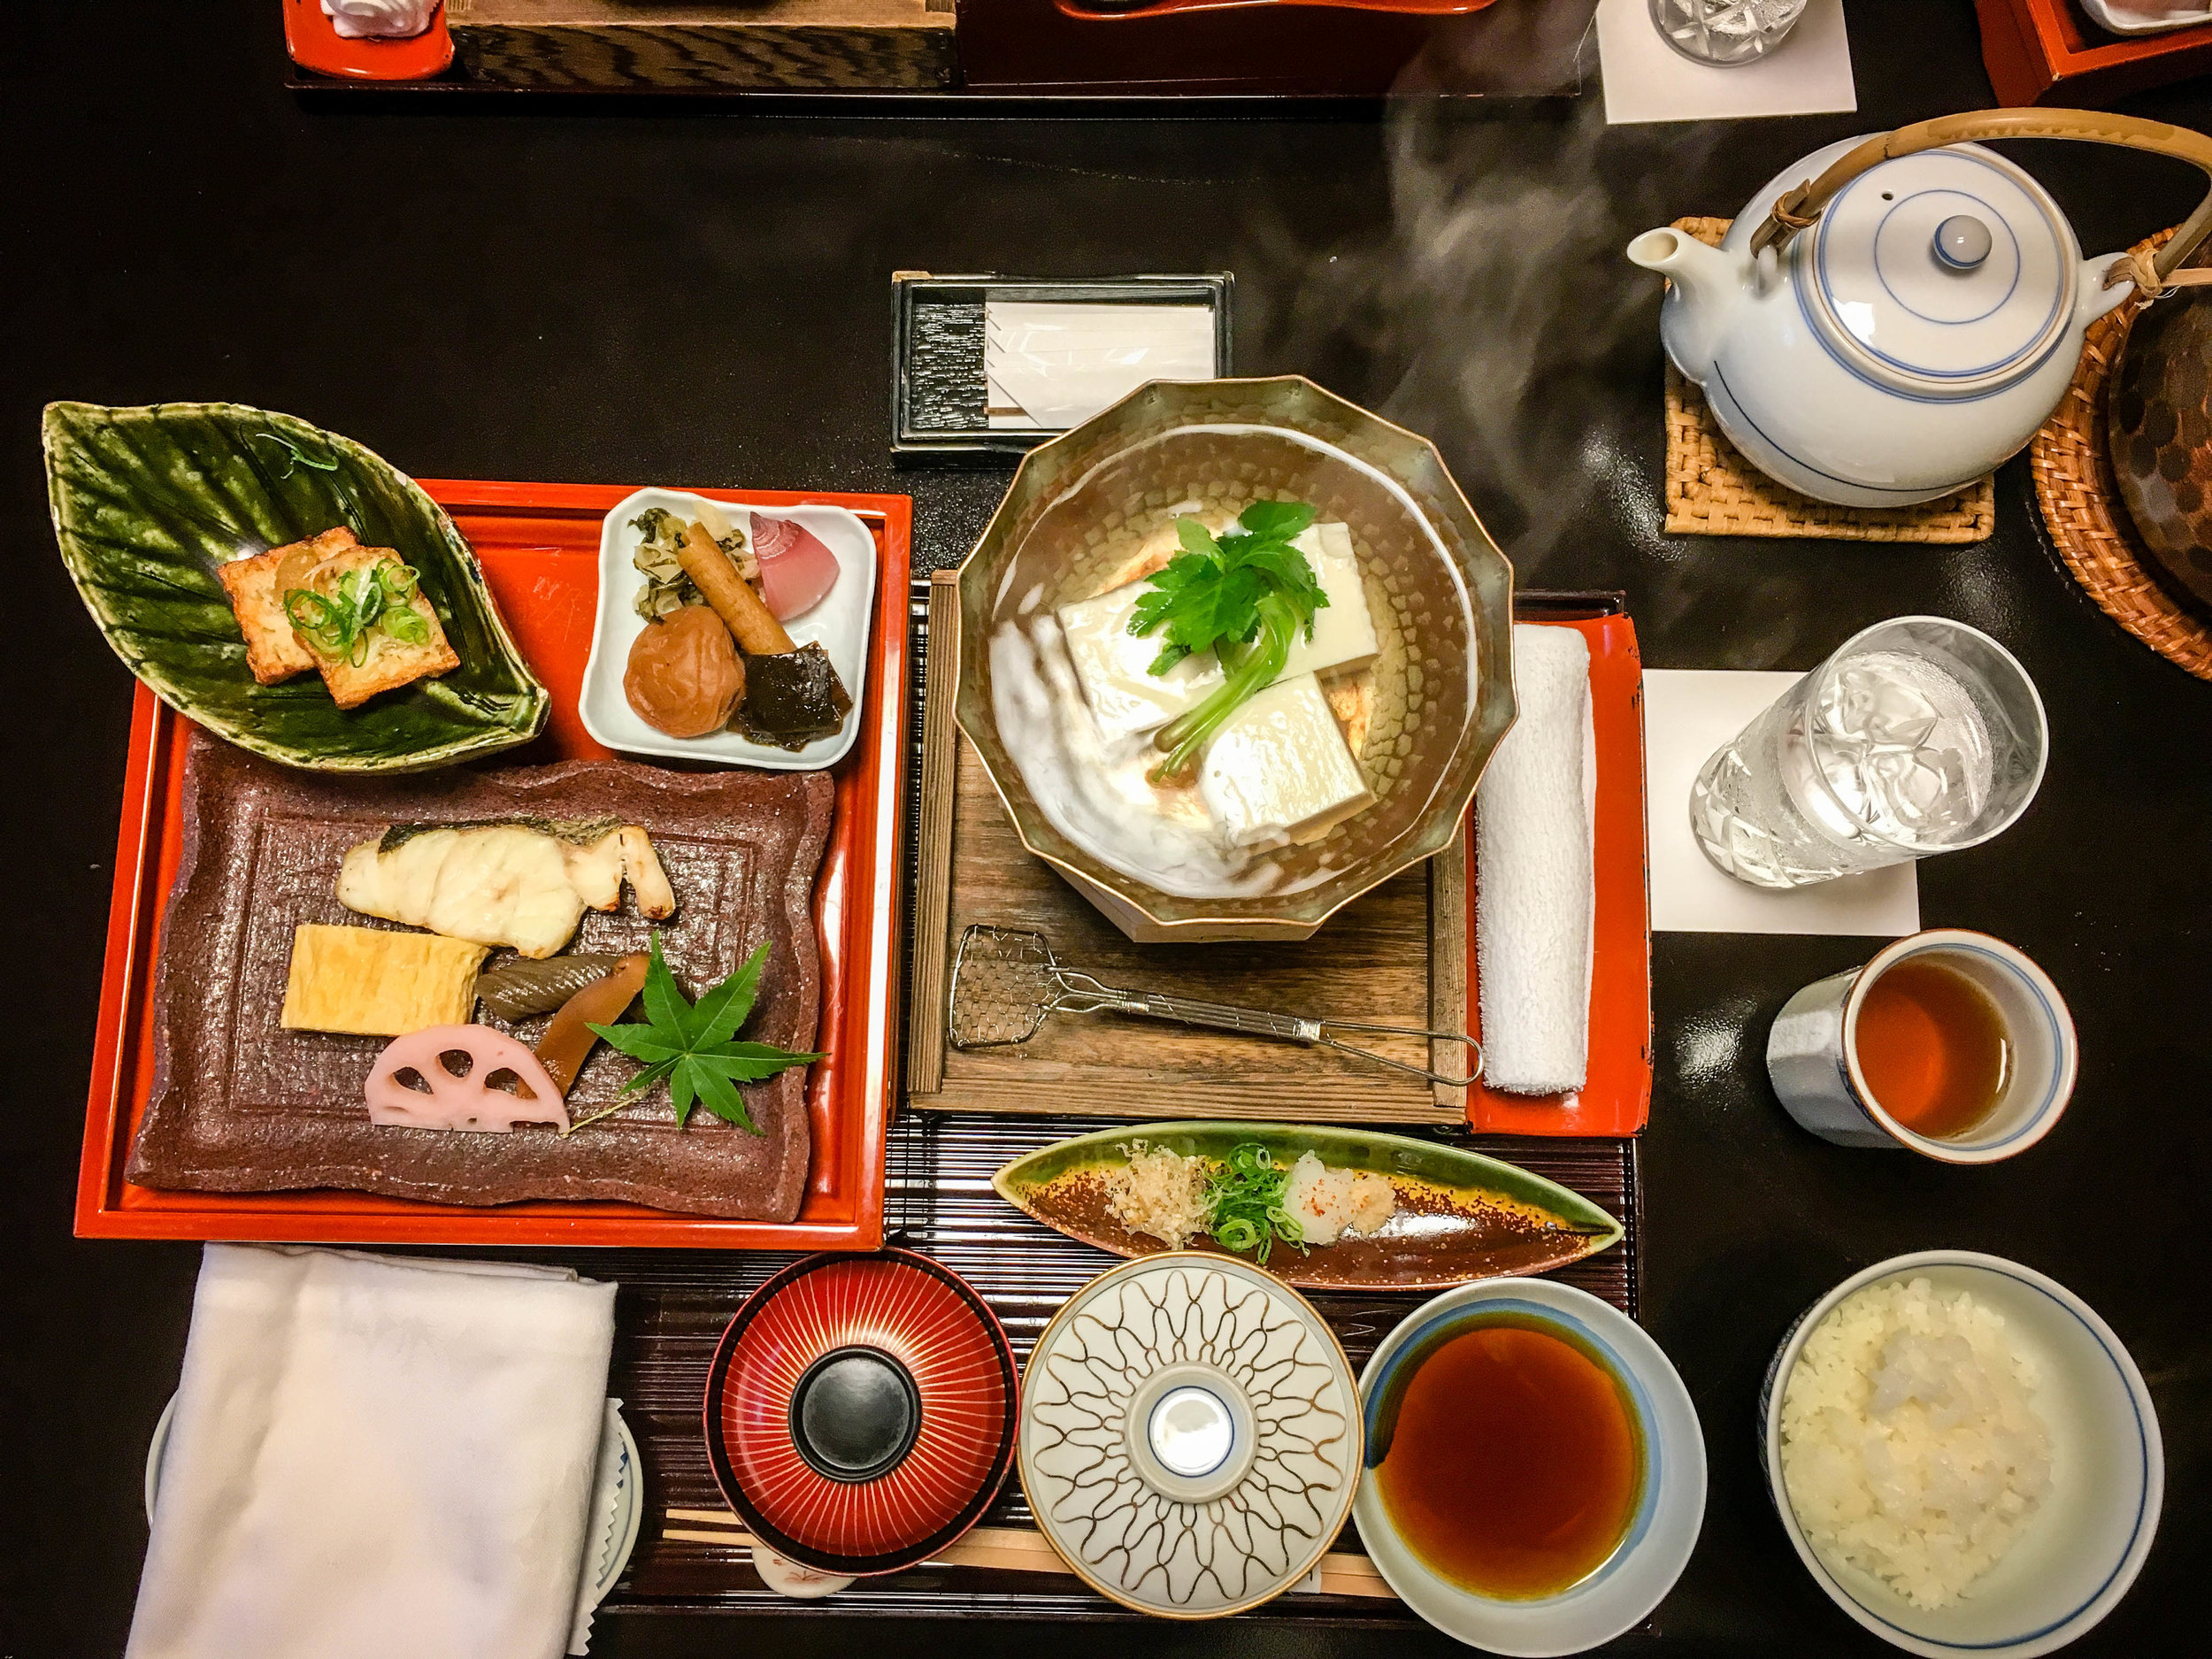 Dishes at a Ryokan. Experiencing a ryokan in a must do for couples doing their honeymoon in Japan